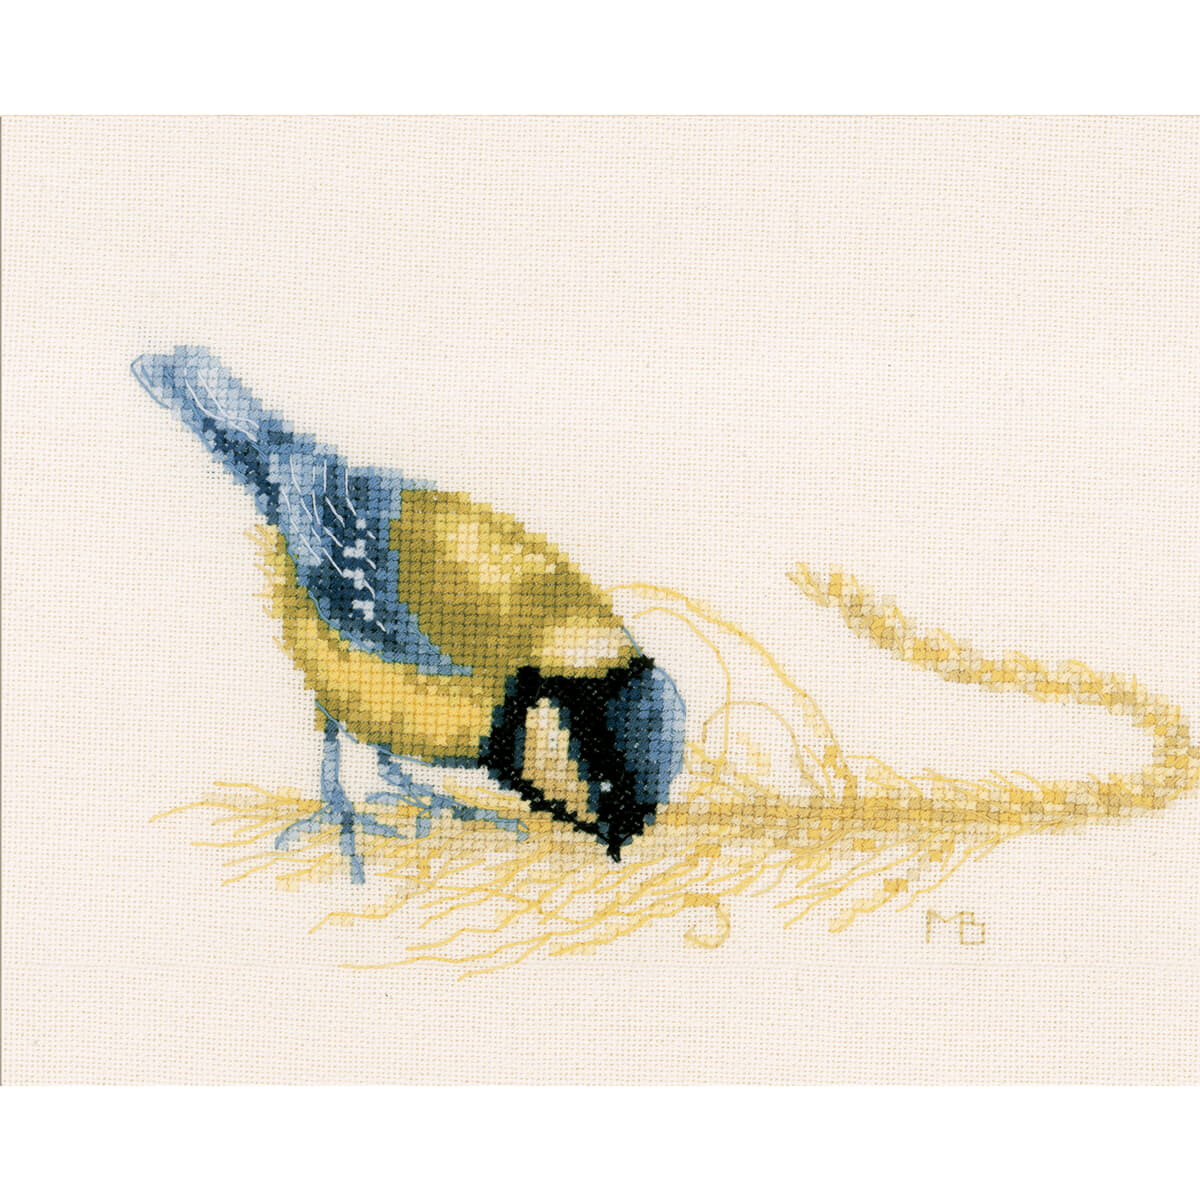 A Lanarte embroidery pack with a blue and yellow bird...